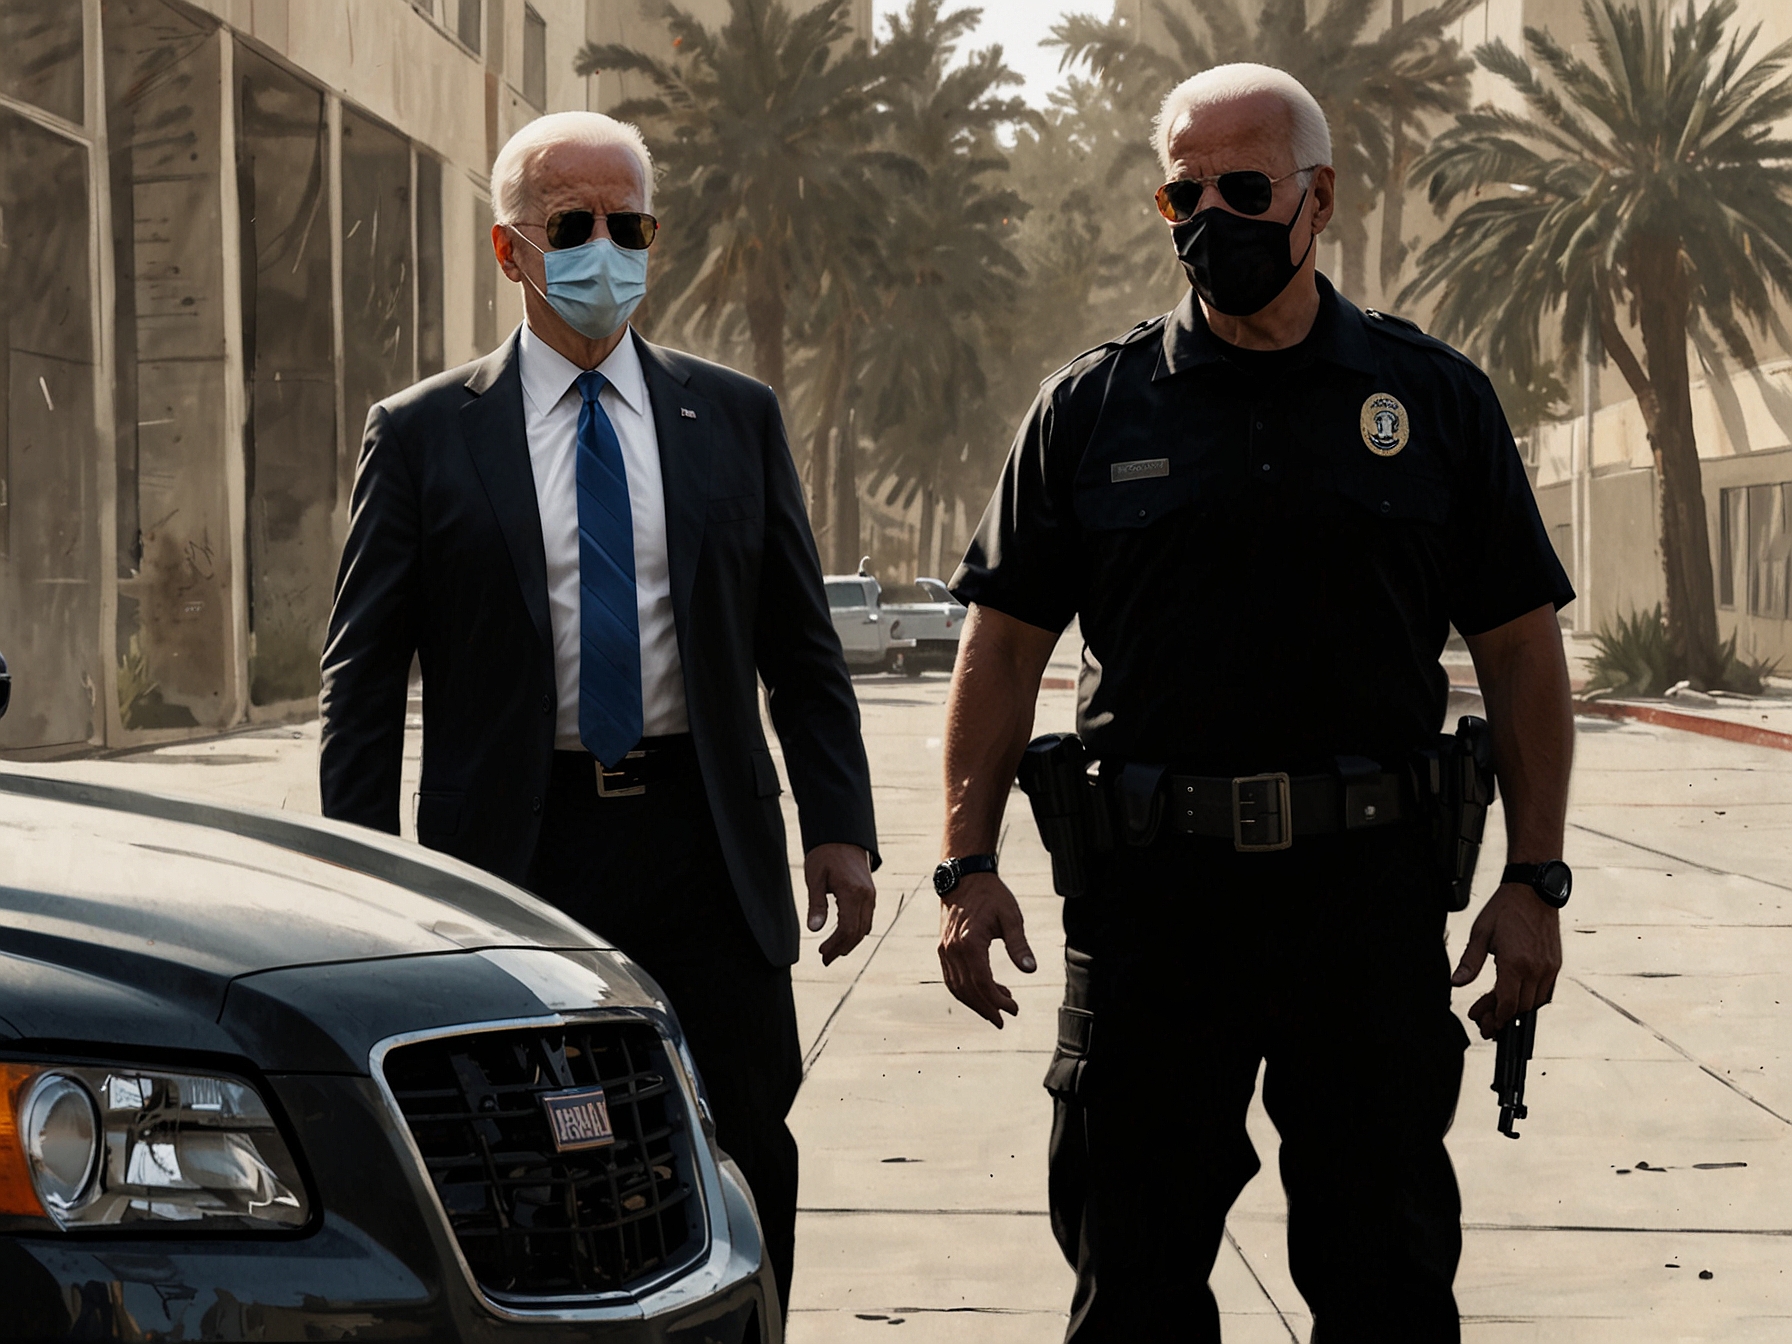 A Secret Service agent, off-duty, being approached by an armed individual in a dimly lit area during President Biden's California trip, emphasizing the risk and tension of the moment.